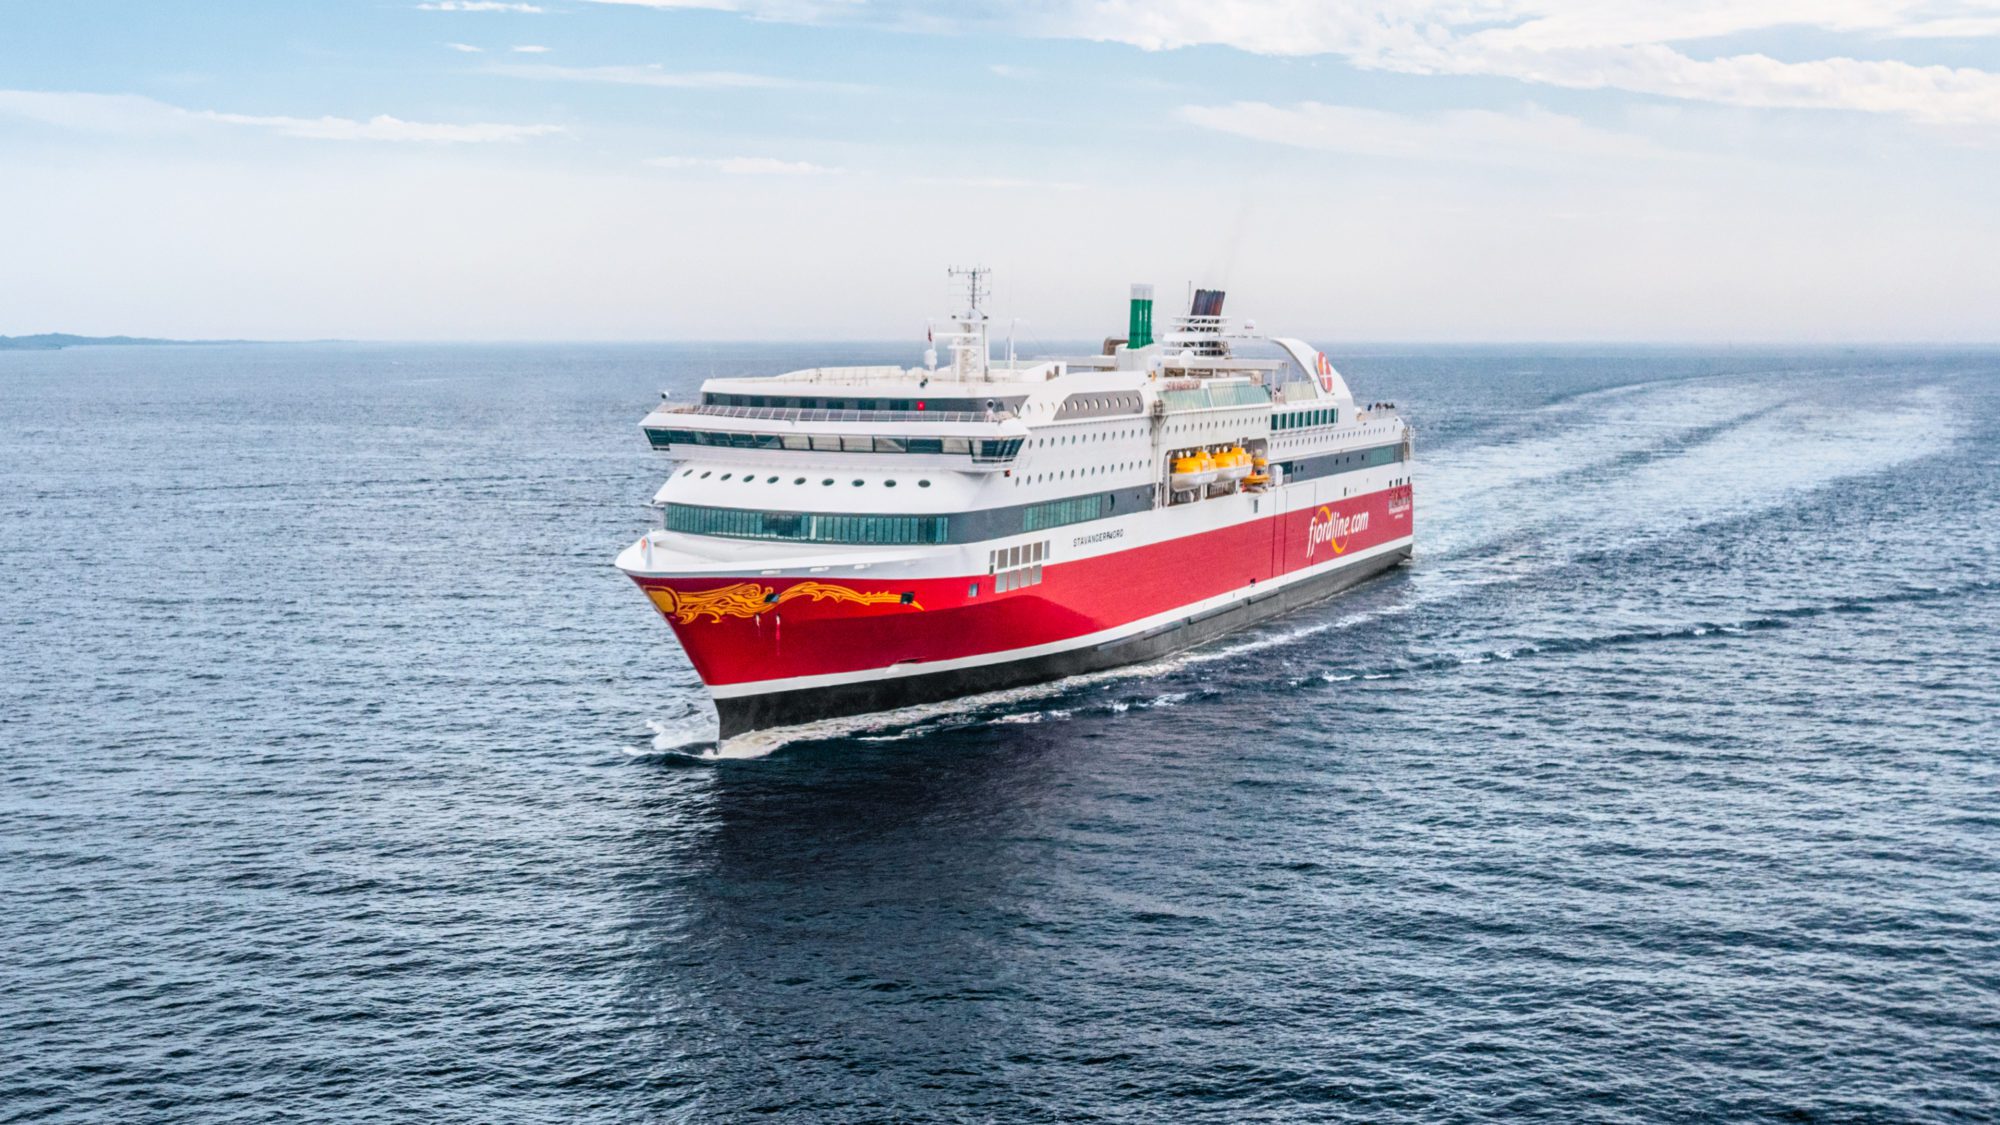 High LNG Costs Force Fjord Lines to Rebuild Two LNG-Powered Ferries to Run on MGO